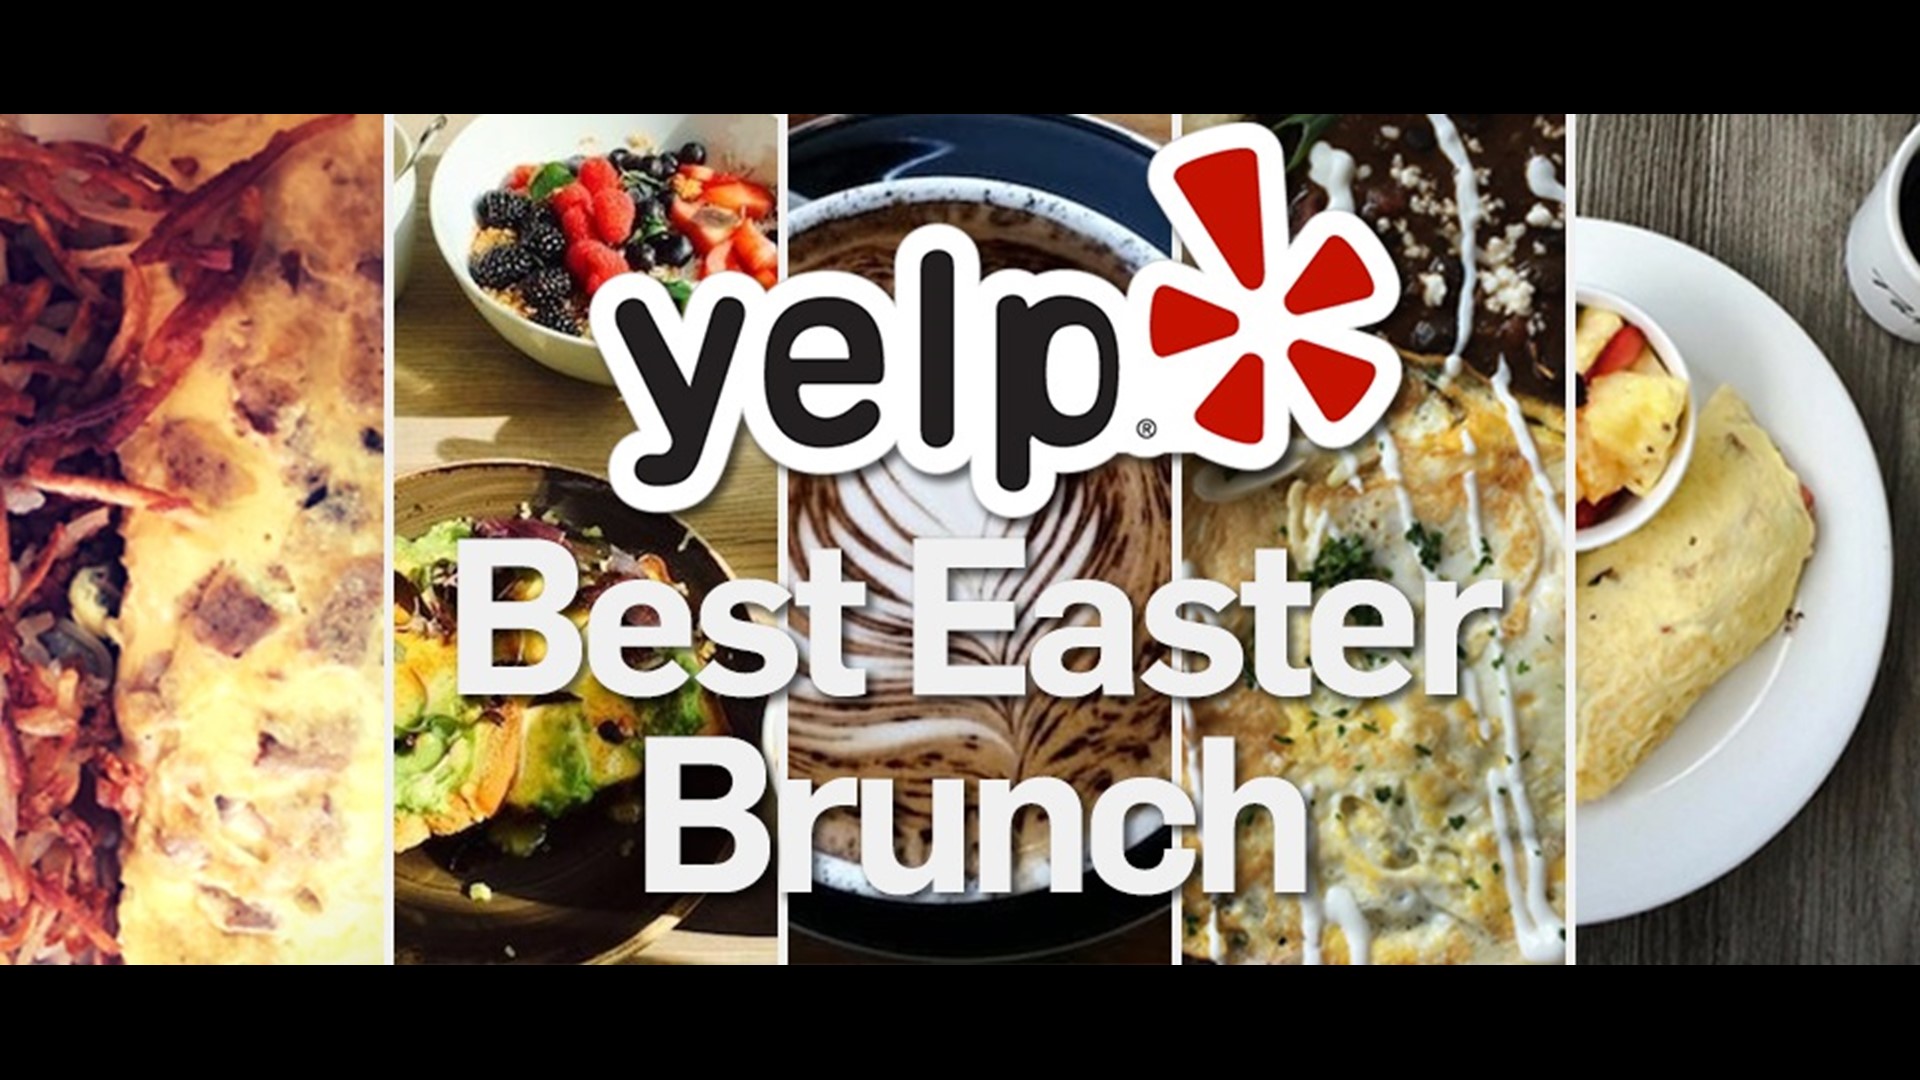 Yelp's 8 best Indianapolisarea spots for Easter brunch